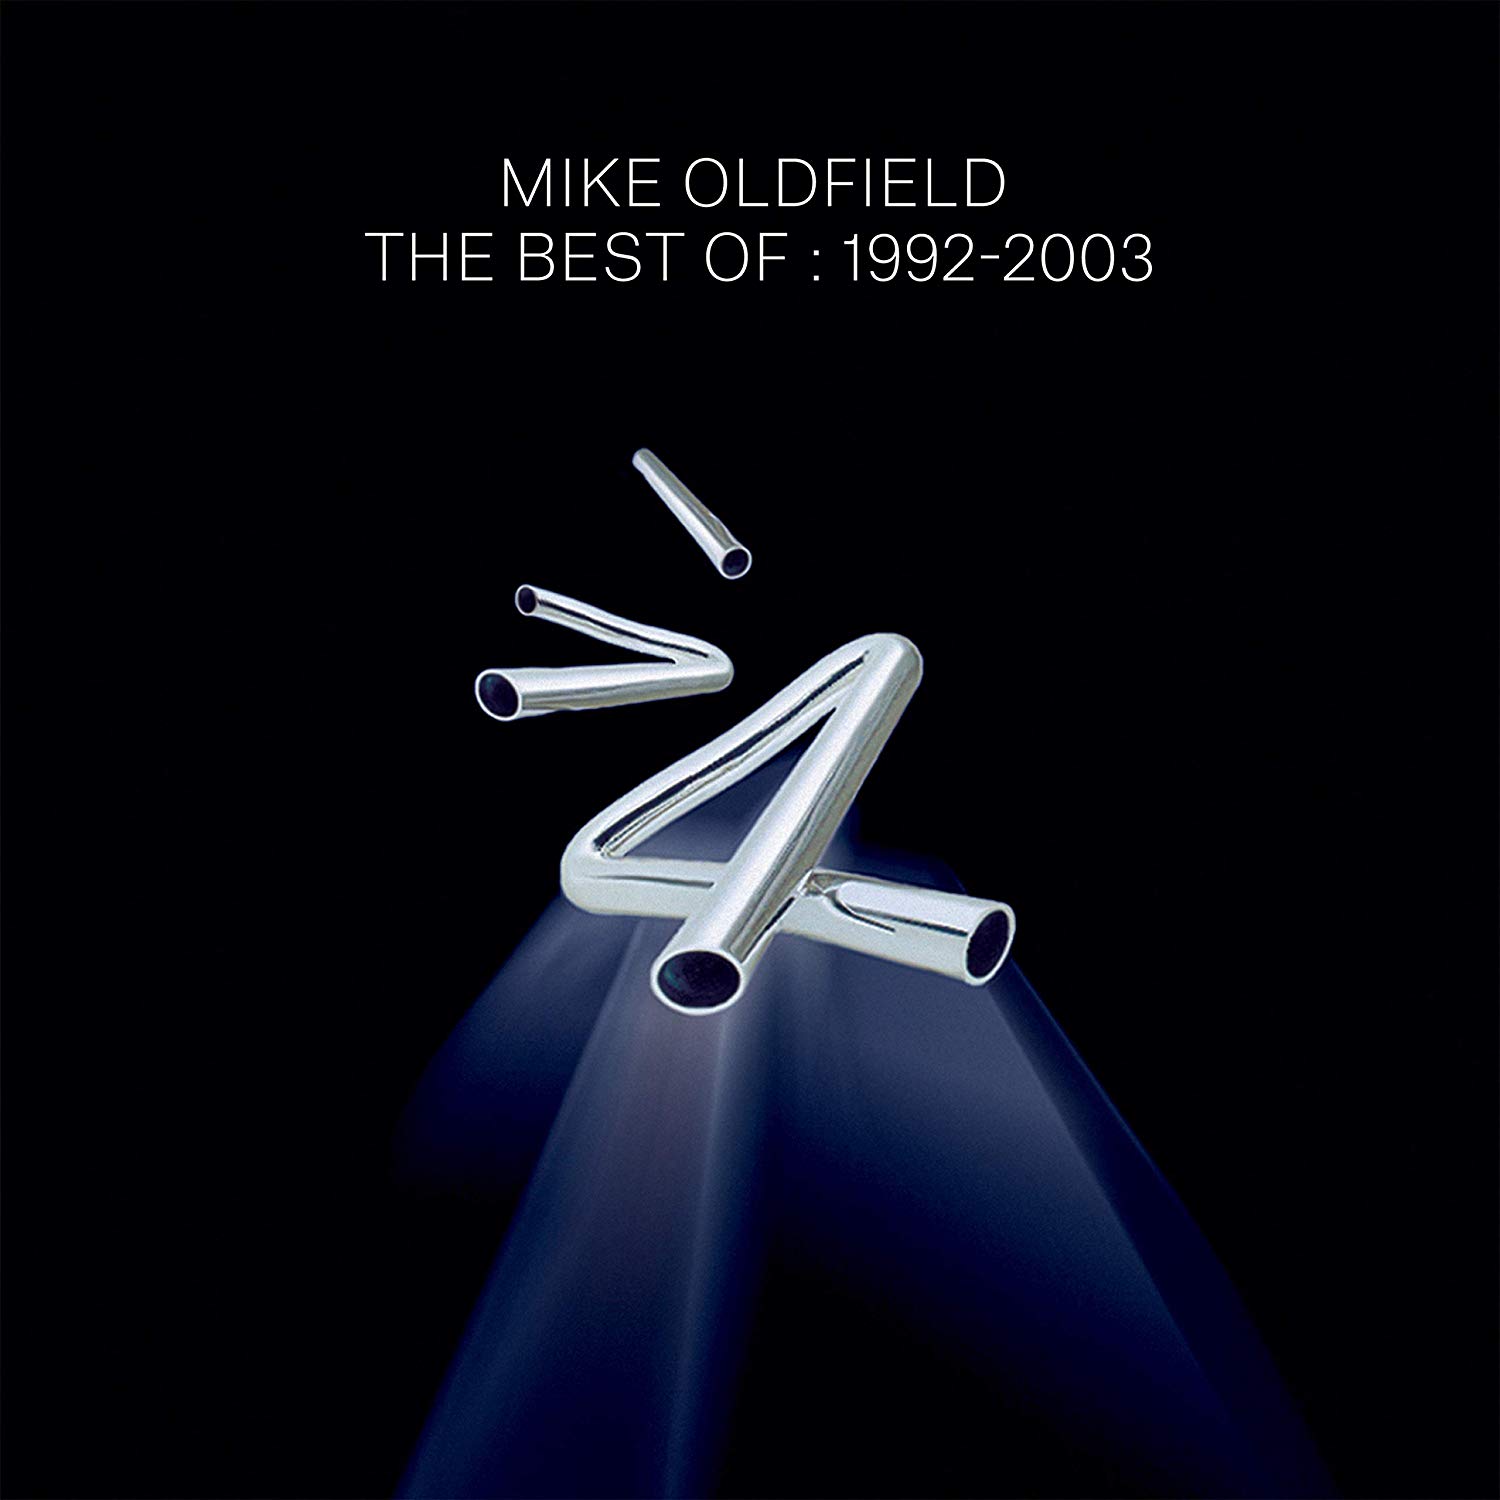 The Best Of: 1992-2003 | Mike Oldfield